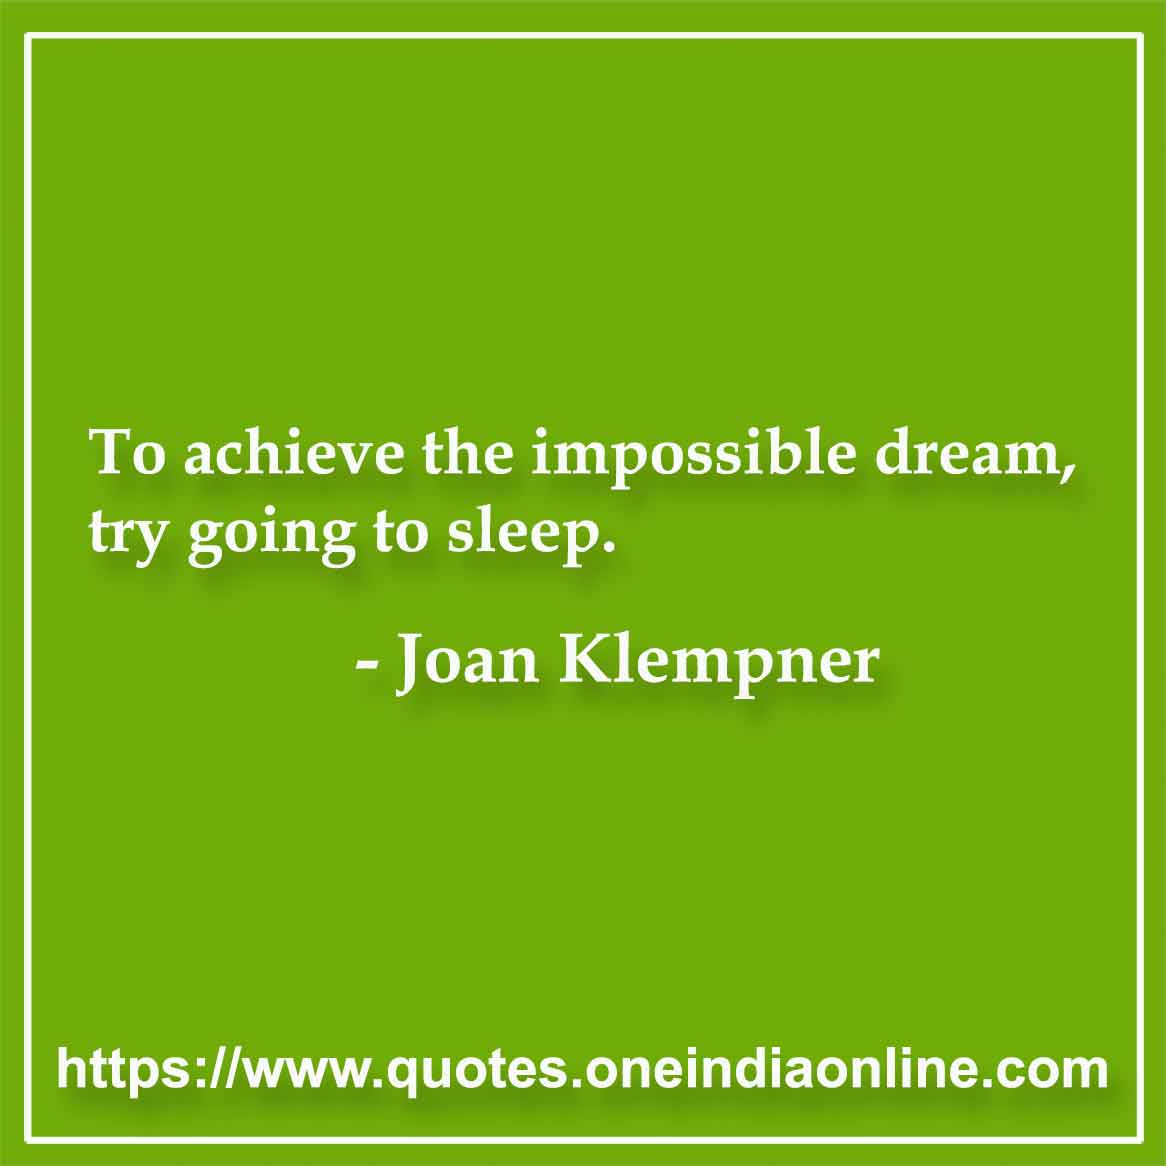 To achieve the impossible dream, try going to sleep.